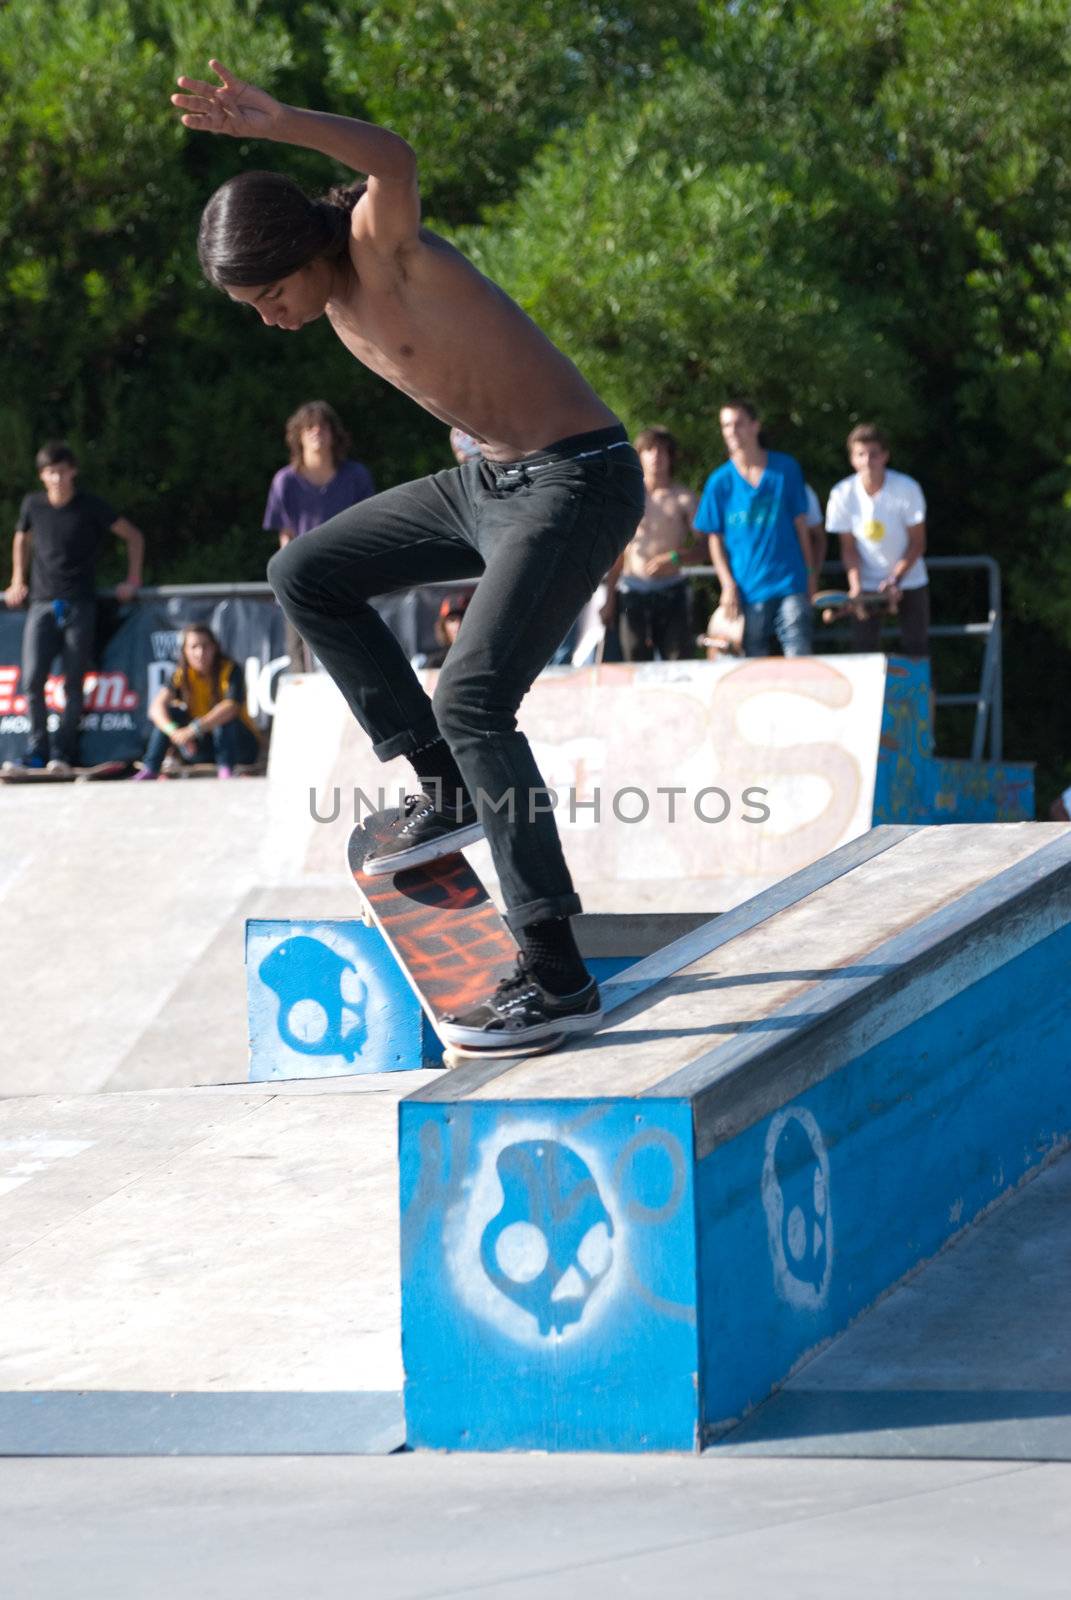 ÍLHAVO, PORTUGAL - SEPTEMBER 04: Thaynan Costa during the 2nd Stage of the DC Skate Challenge on September 04, 2010 in Ílhavo, Portugal.